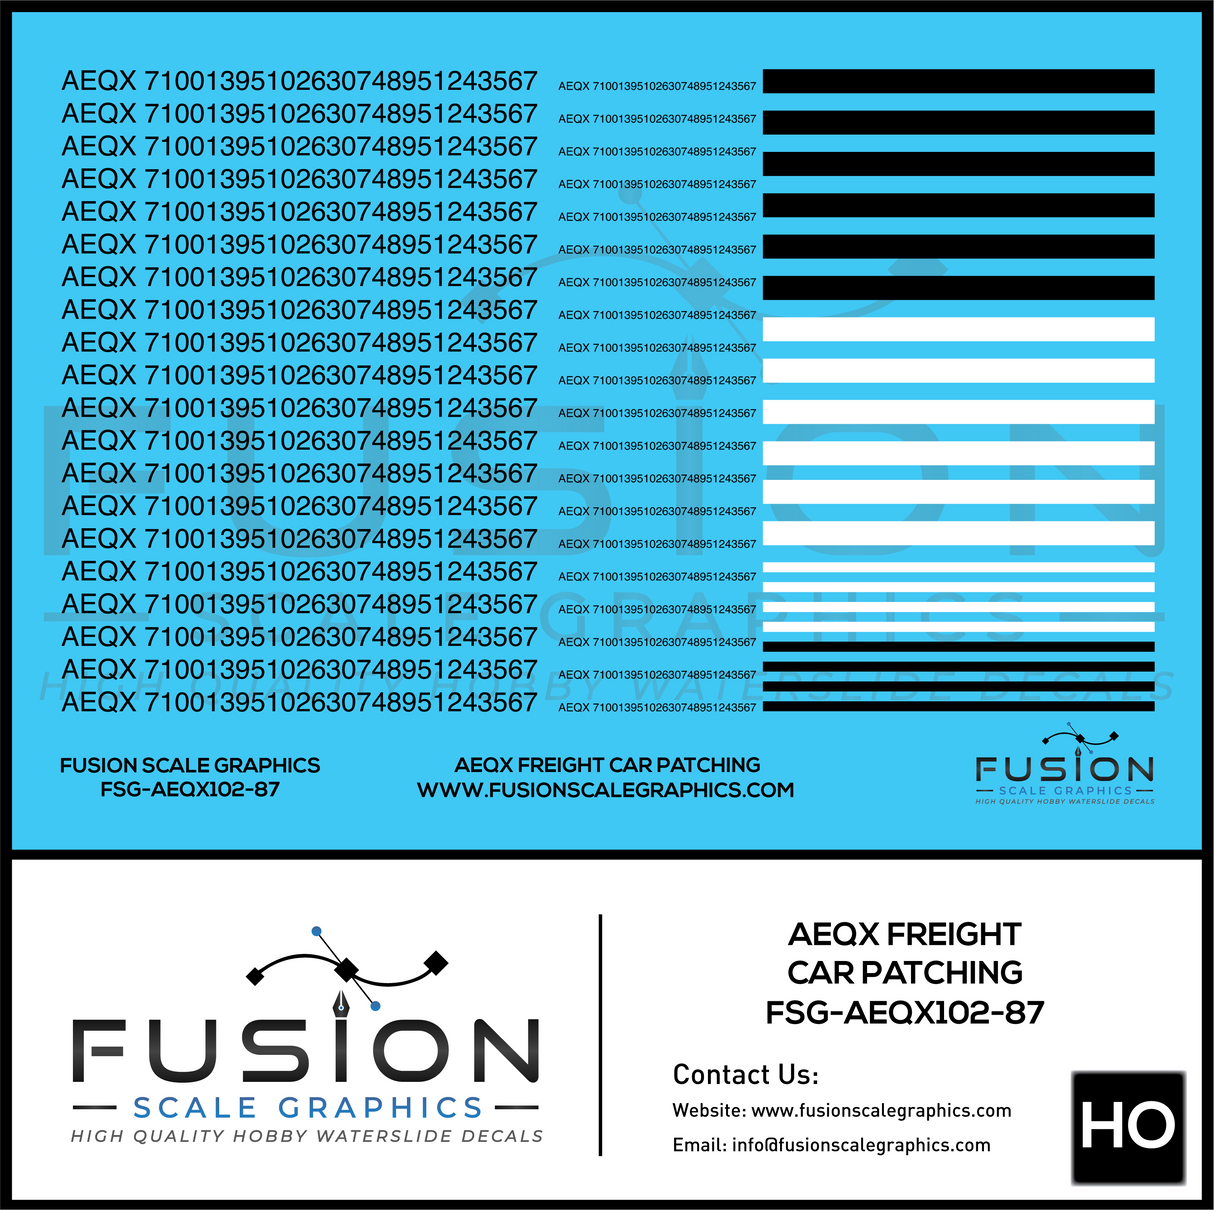 HO Scale AEQX Black Freight Car Patching Decal Set